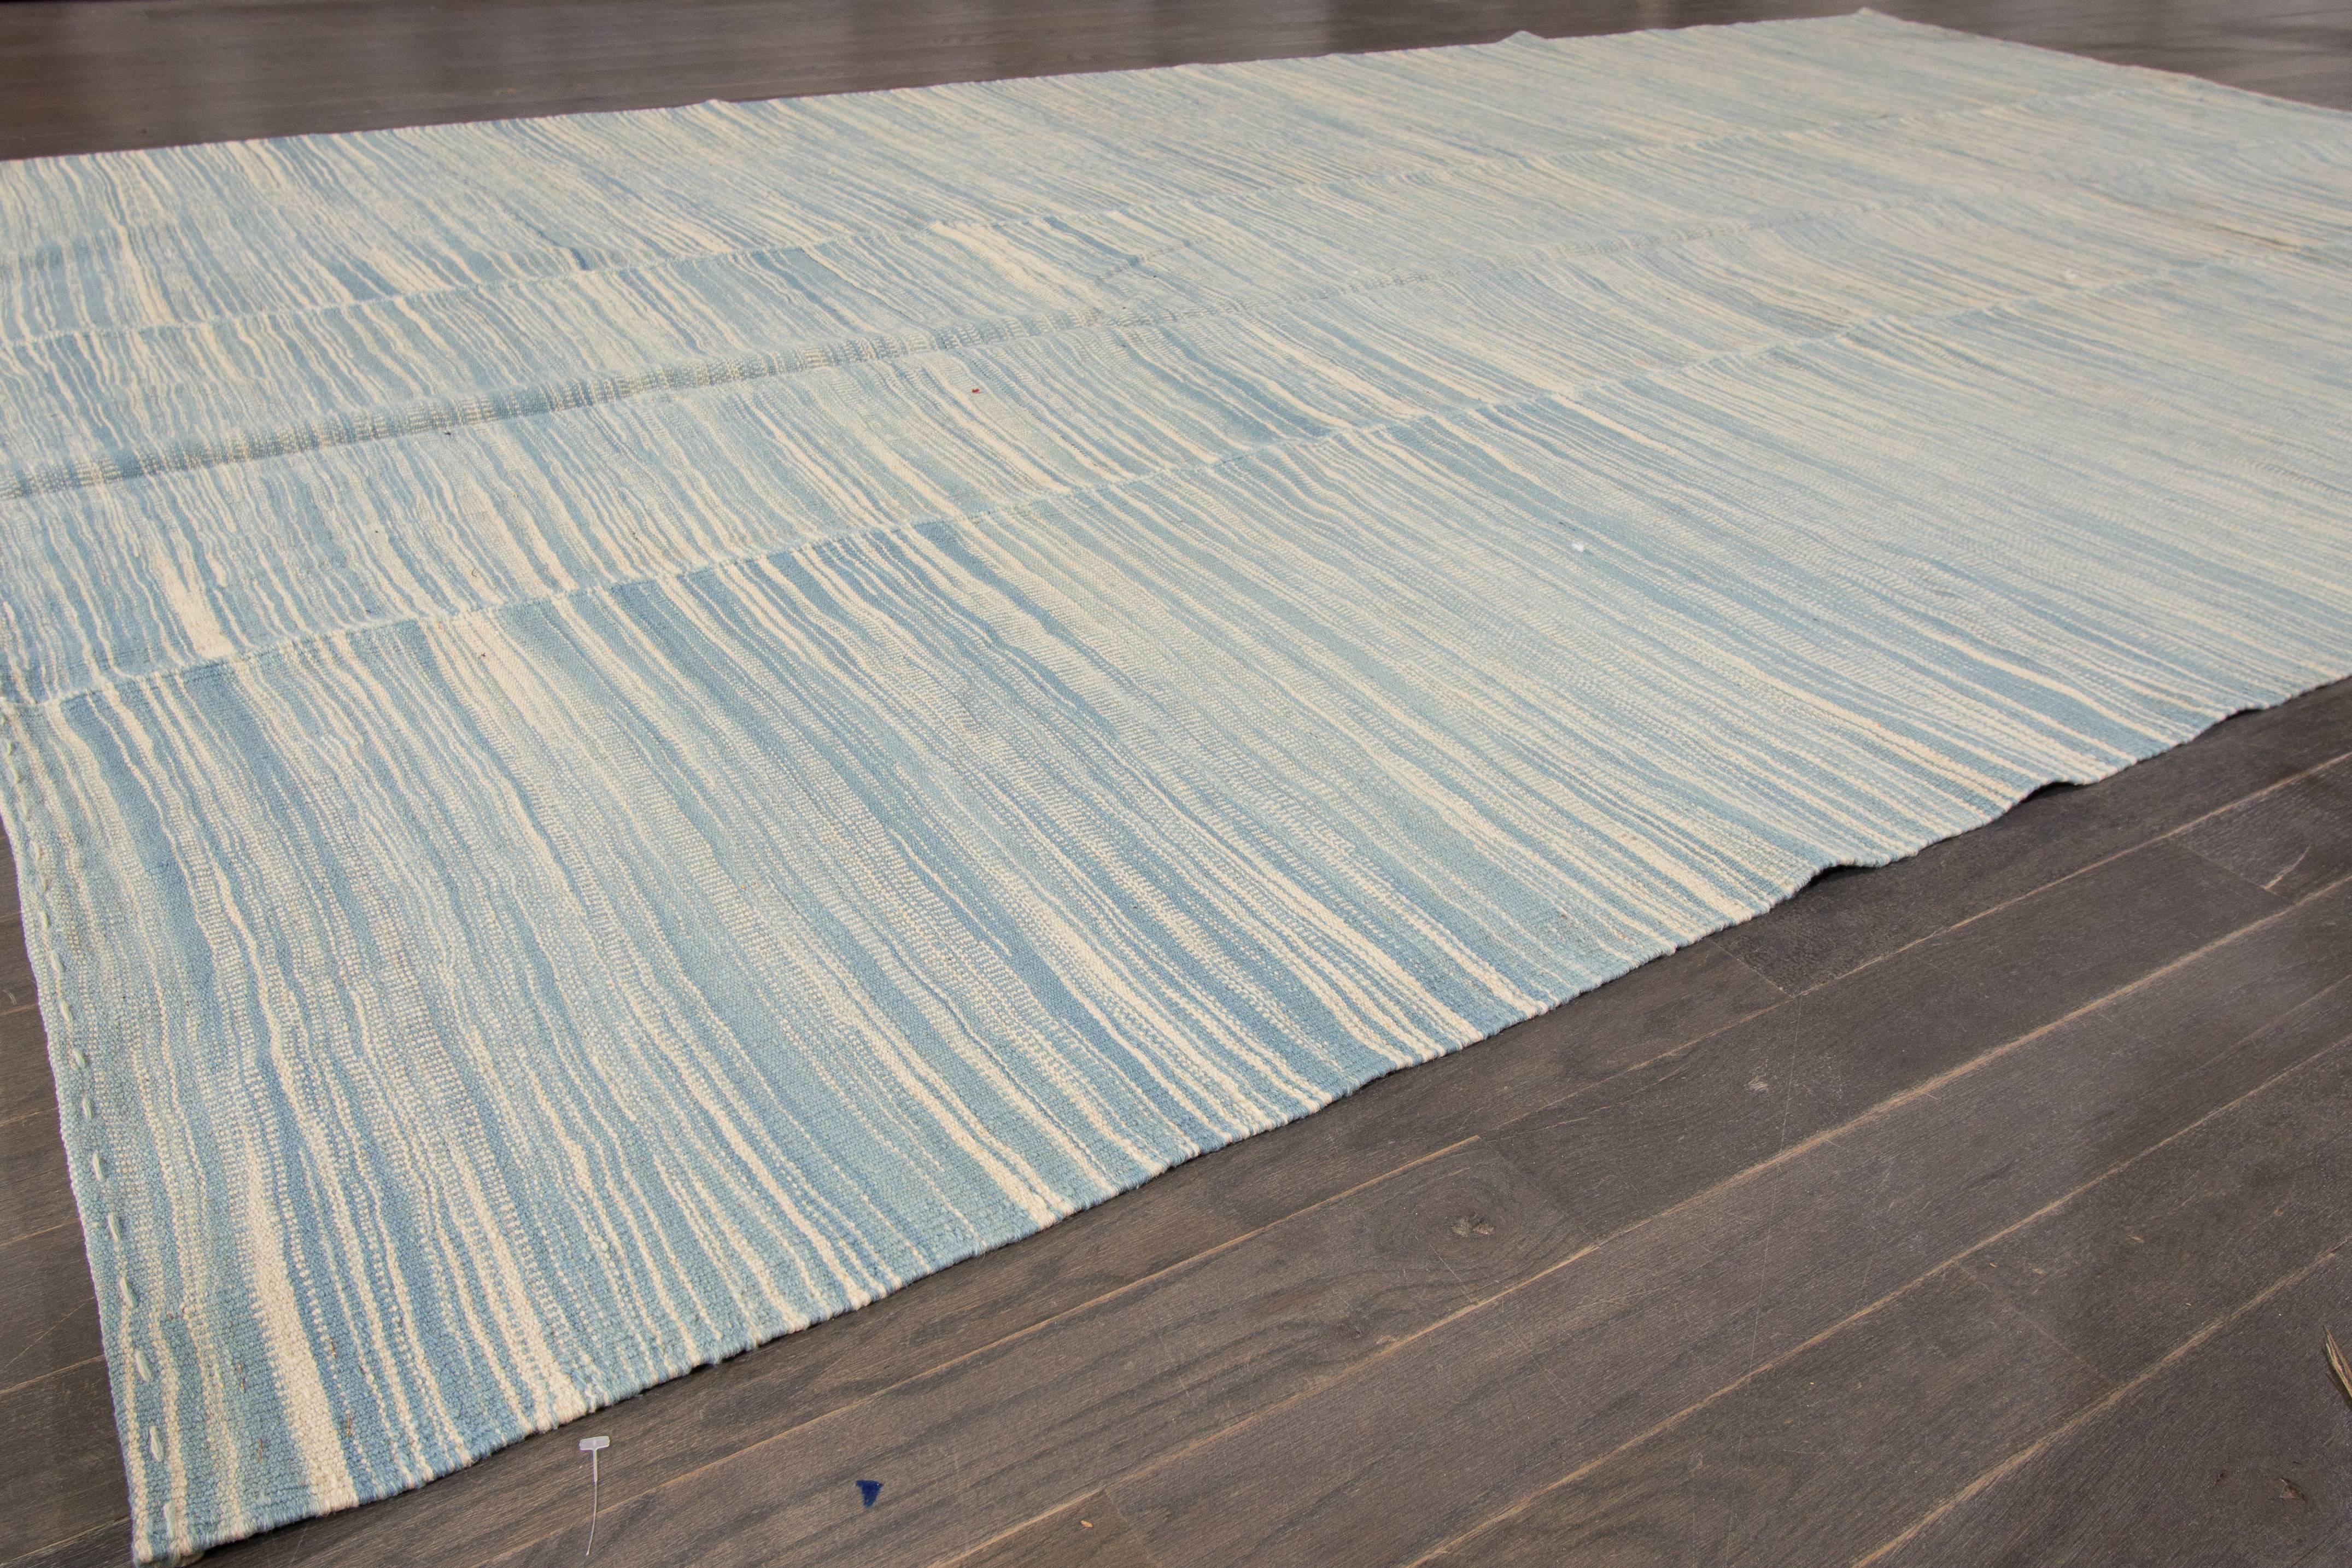 21st century contemporary Turkish Kilim rug with an all-over pale blue and ivory textured field. Measures 6.08x10.11.